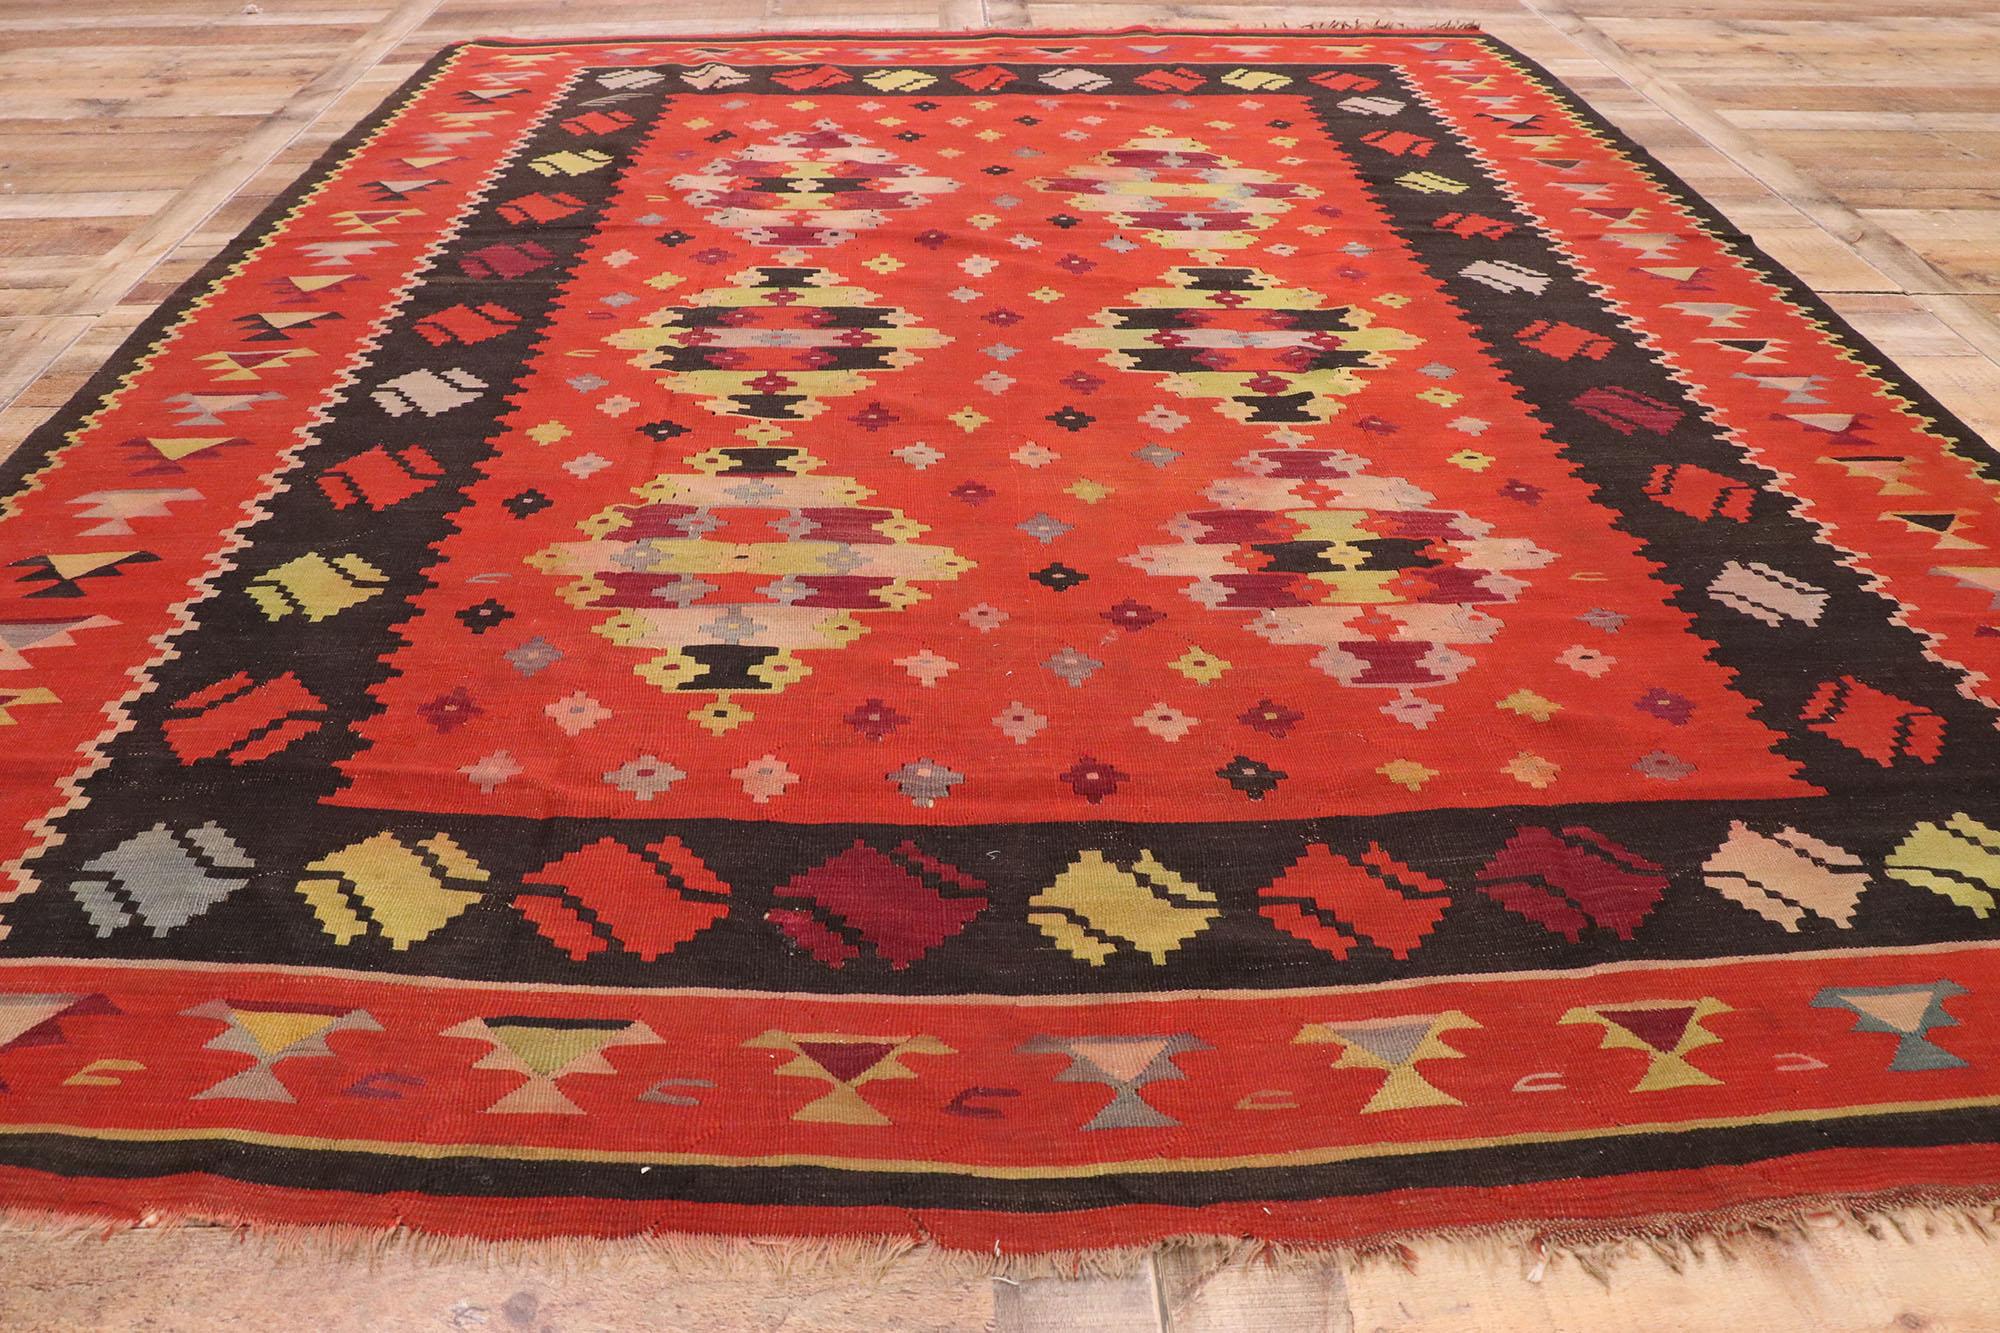 Wool Vintage Turkish Kilim Rug with Navajo Adirondack Design and Two Grey Hills Style For Sale